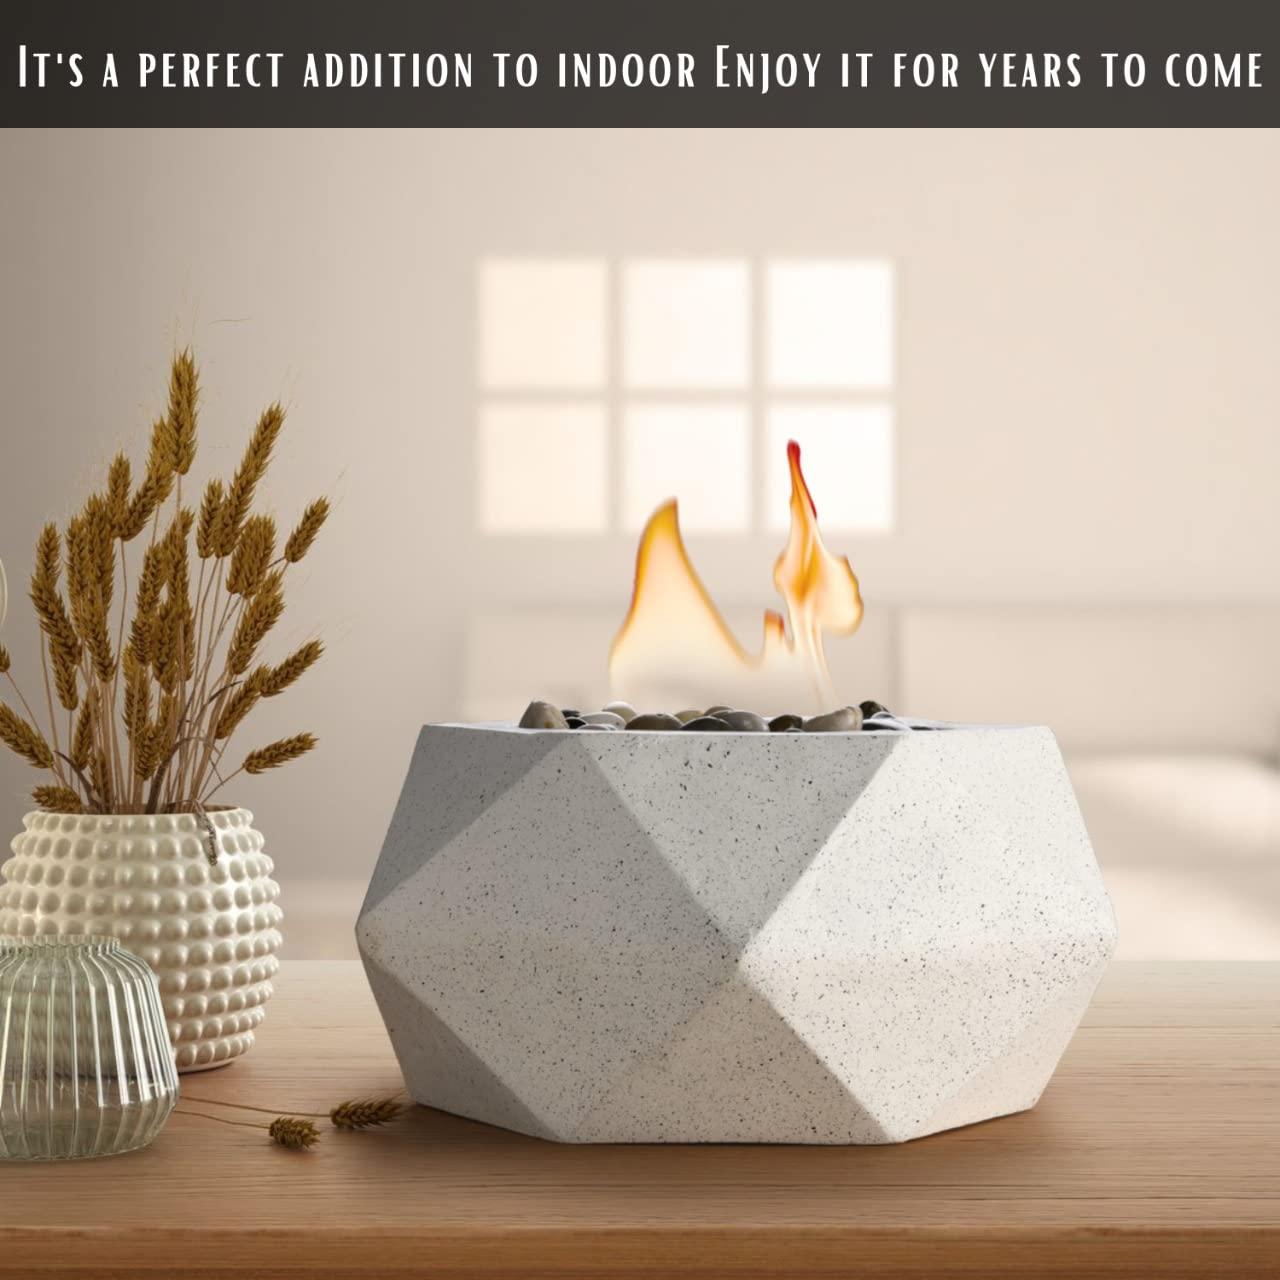 Arzal Tabletop Fire Pit | Table top Firepit with Lid | Stylish Indoor & Outdoor Fireplace | Smore Maker Firepit - Modern Personal Portable Fireplace | Perfect for Decoration & Outdoor Parties - CookCave